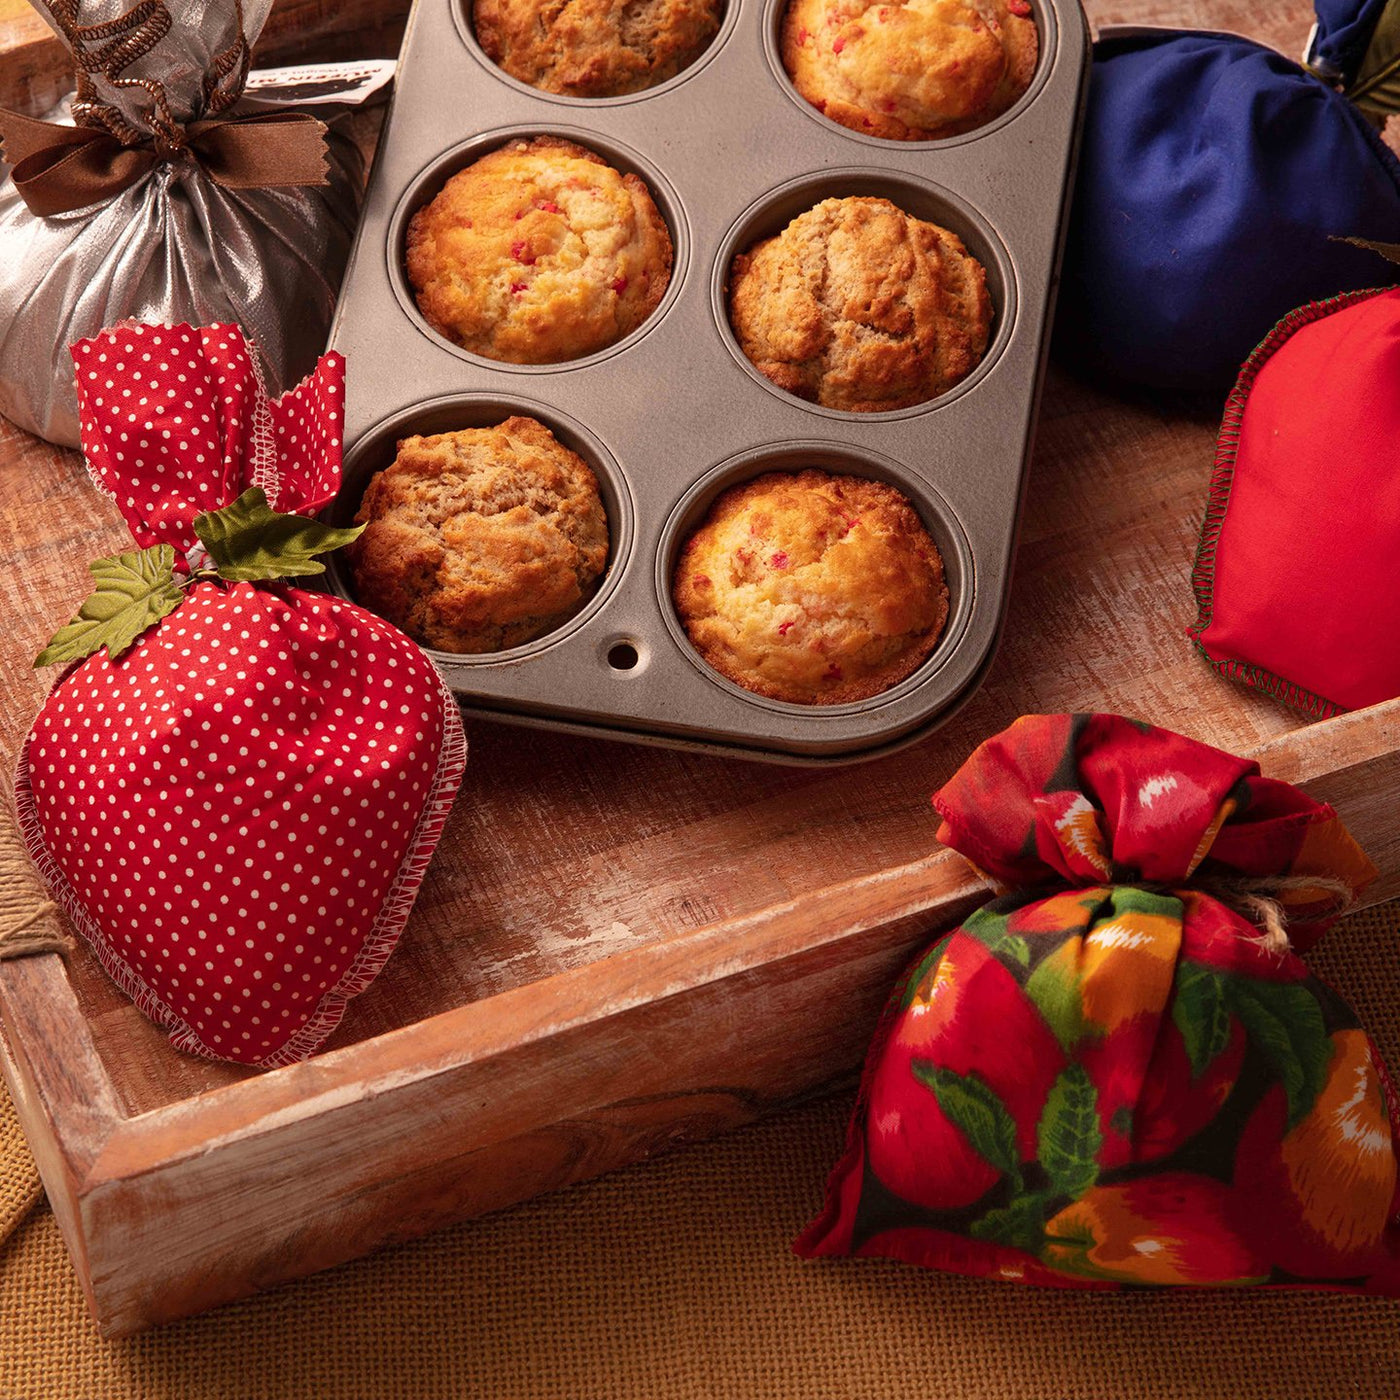 How to Jazz up a Store-Bought Muffin Mix